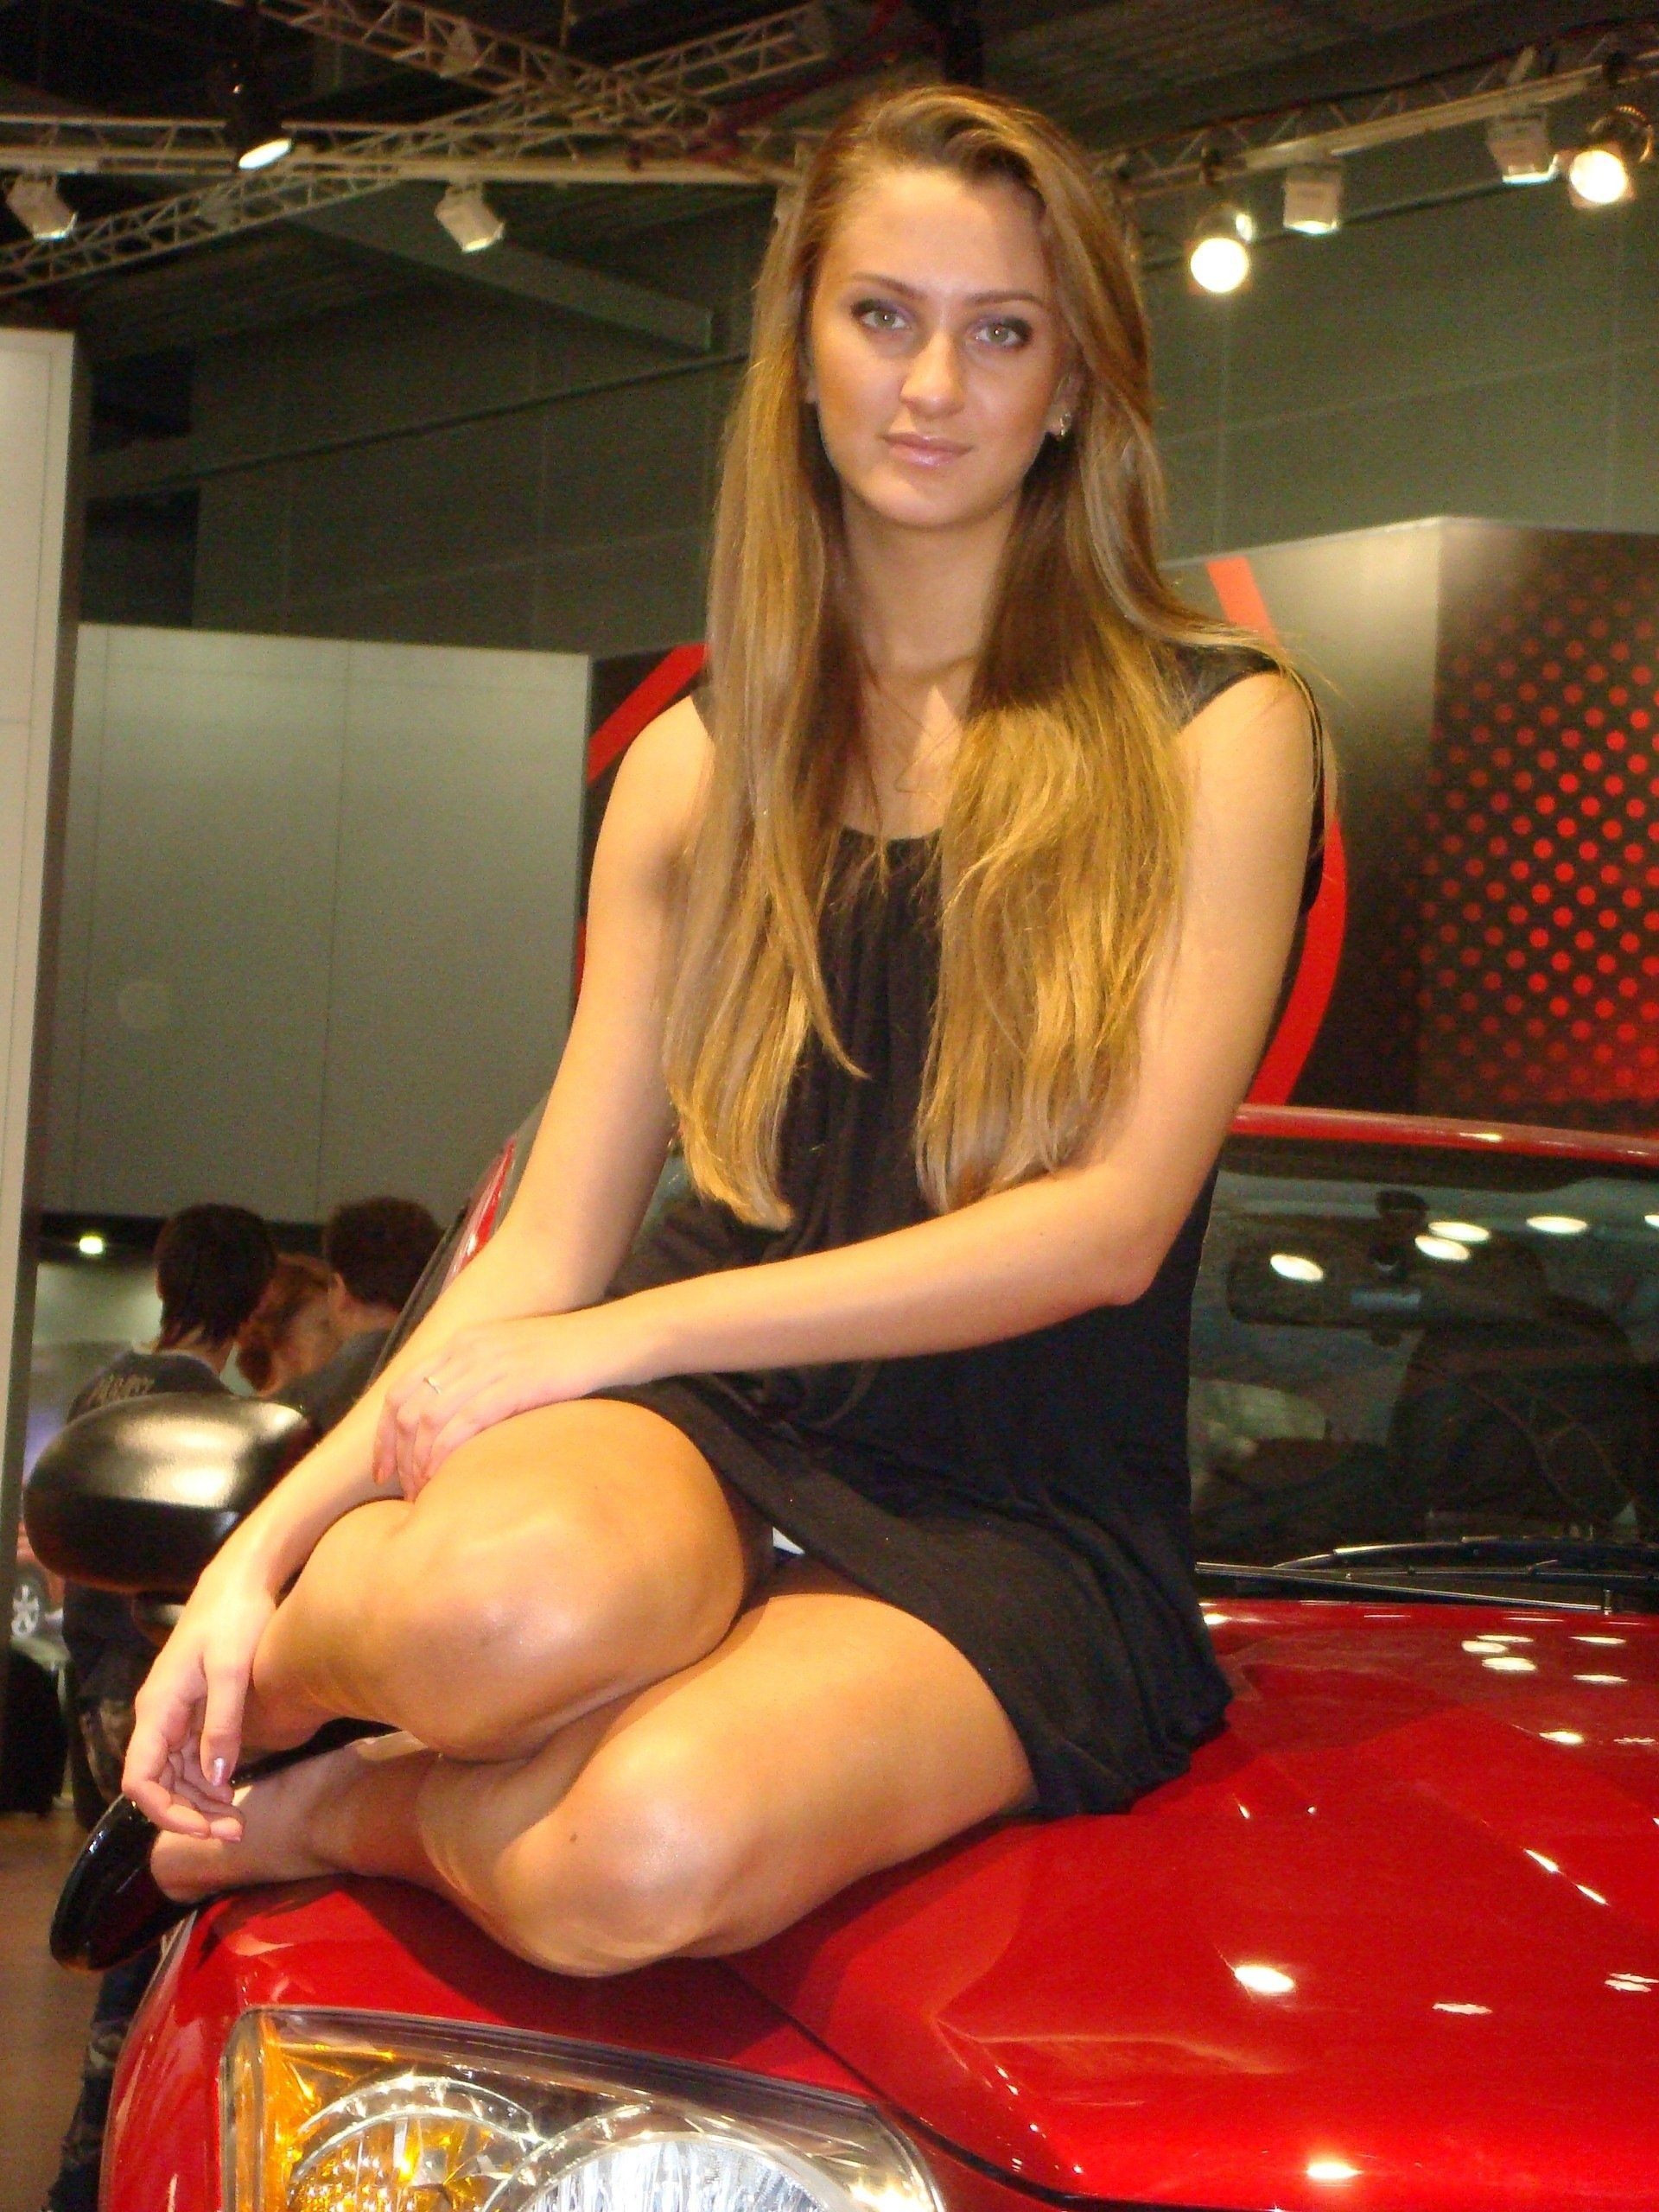 best of At carshow Upskirt